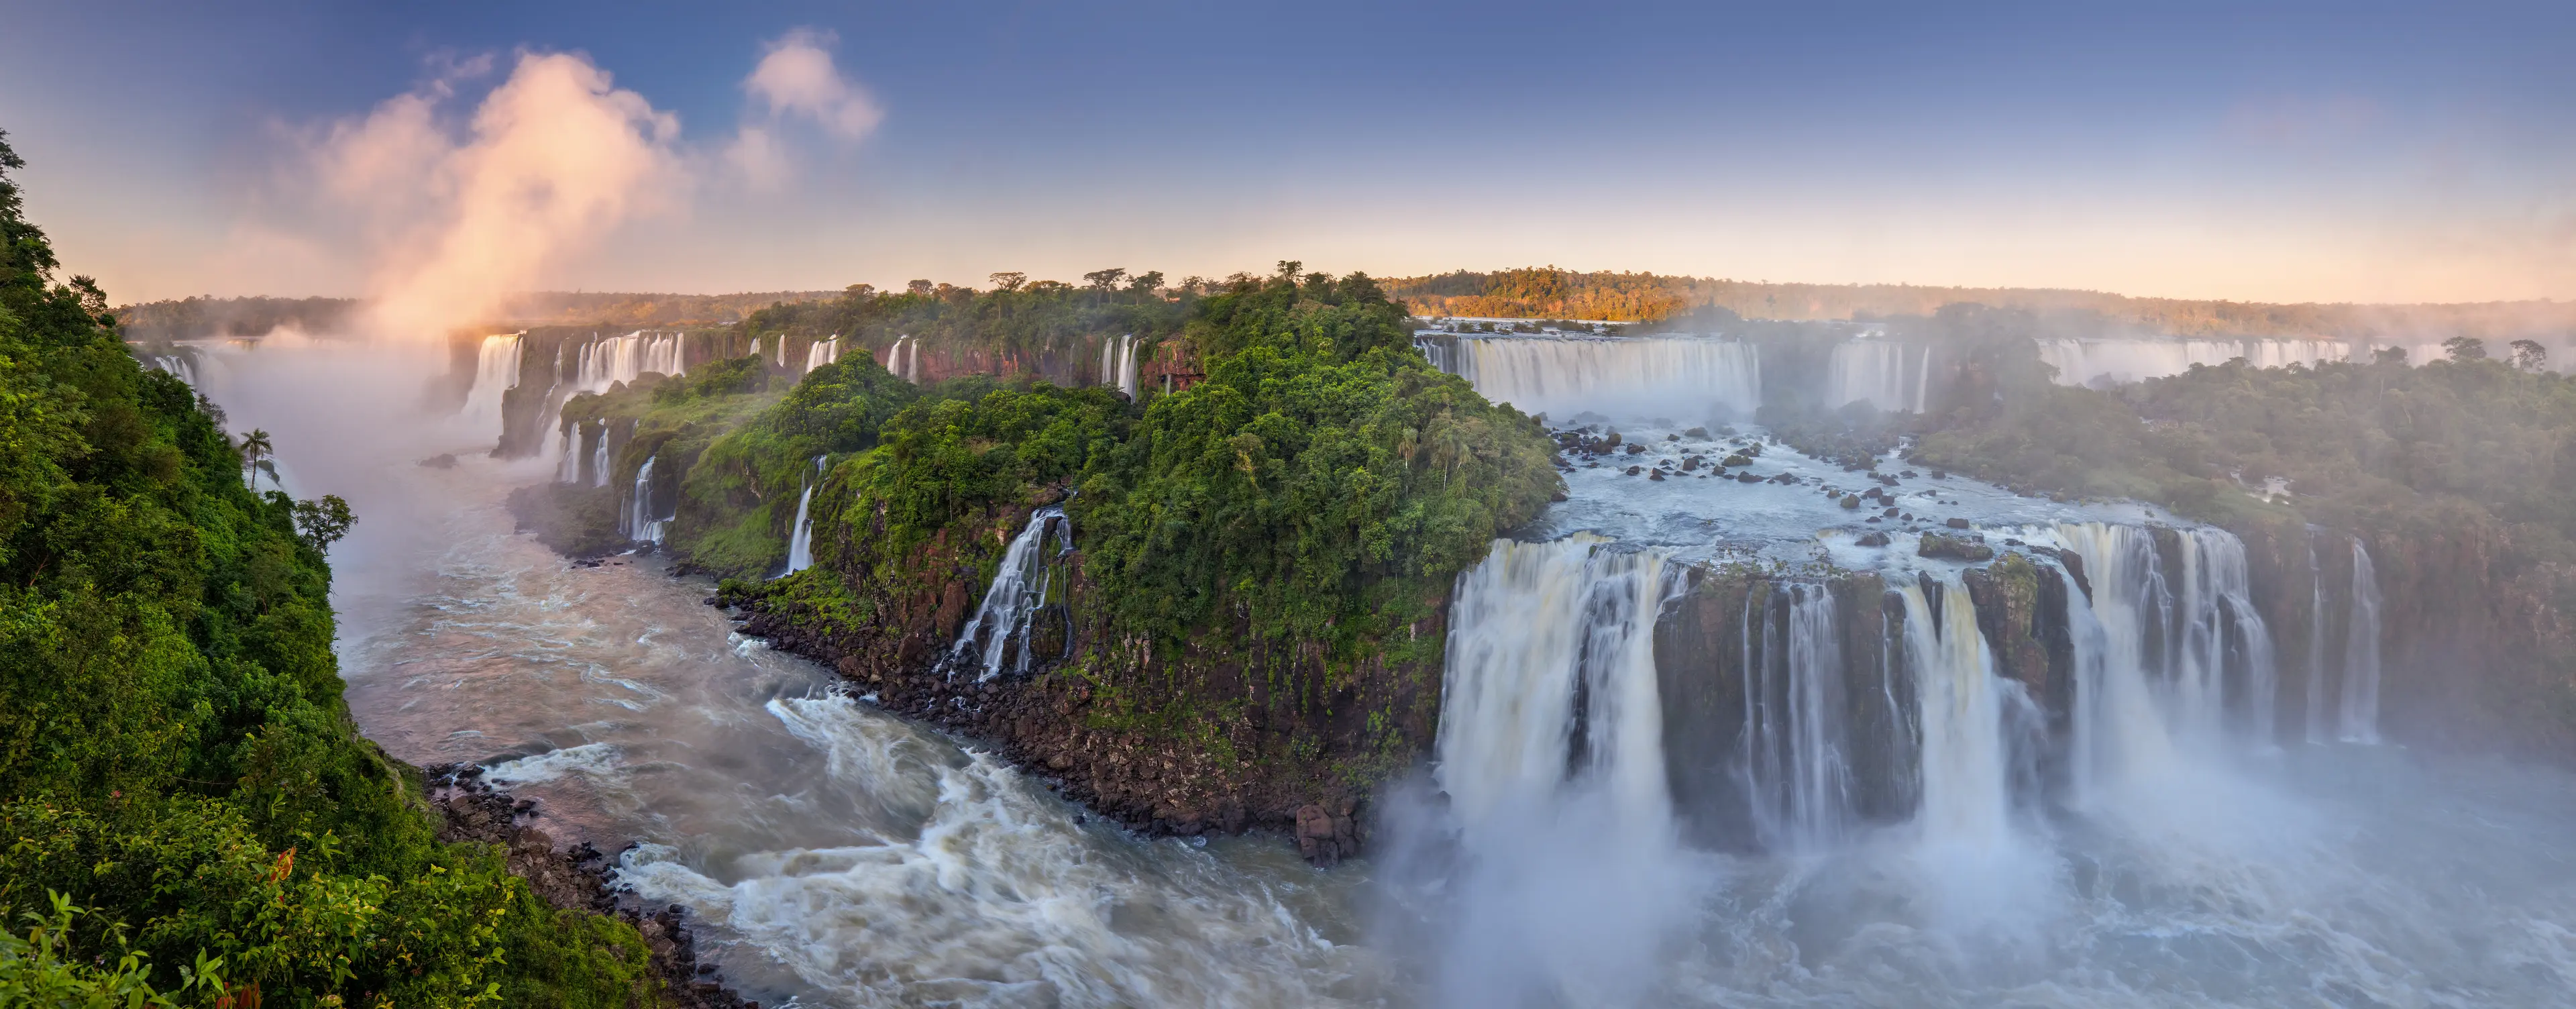 2-Day Food, Wine and Relaxation Tour at Hidden Iguazu Falls